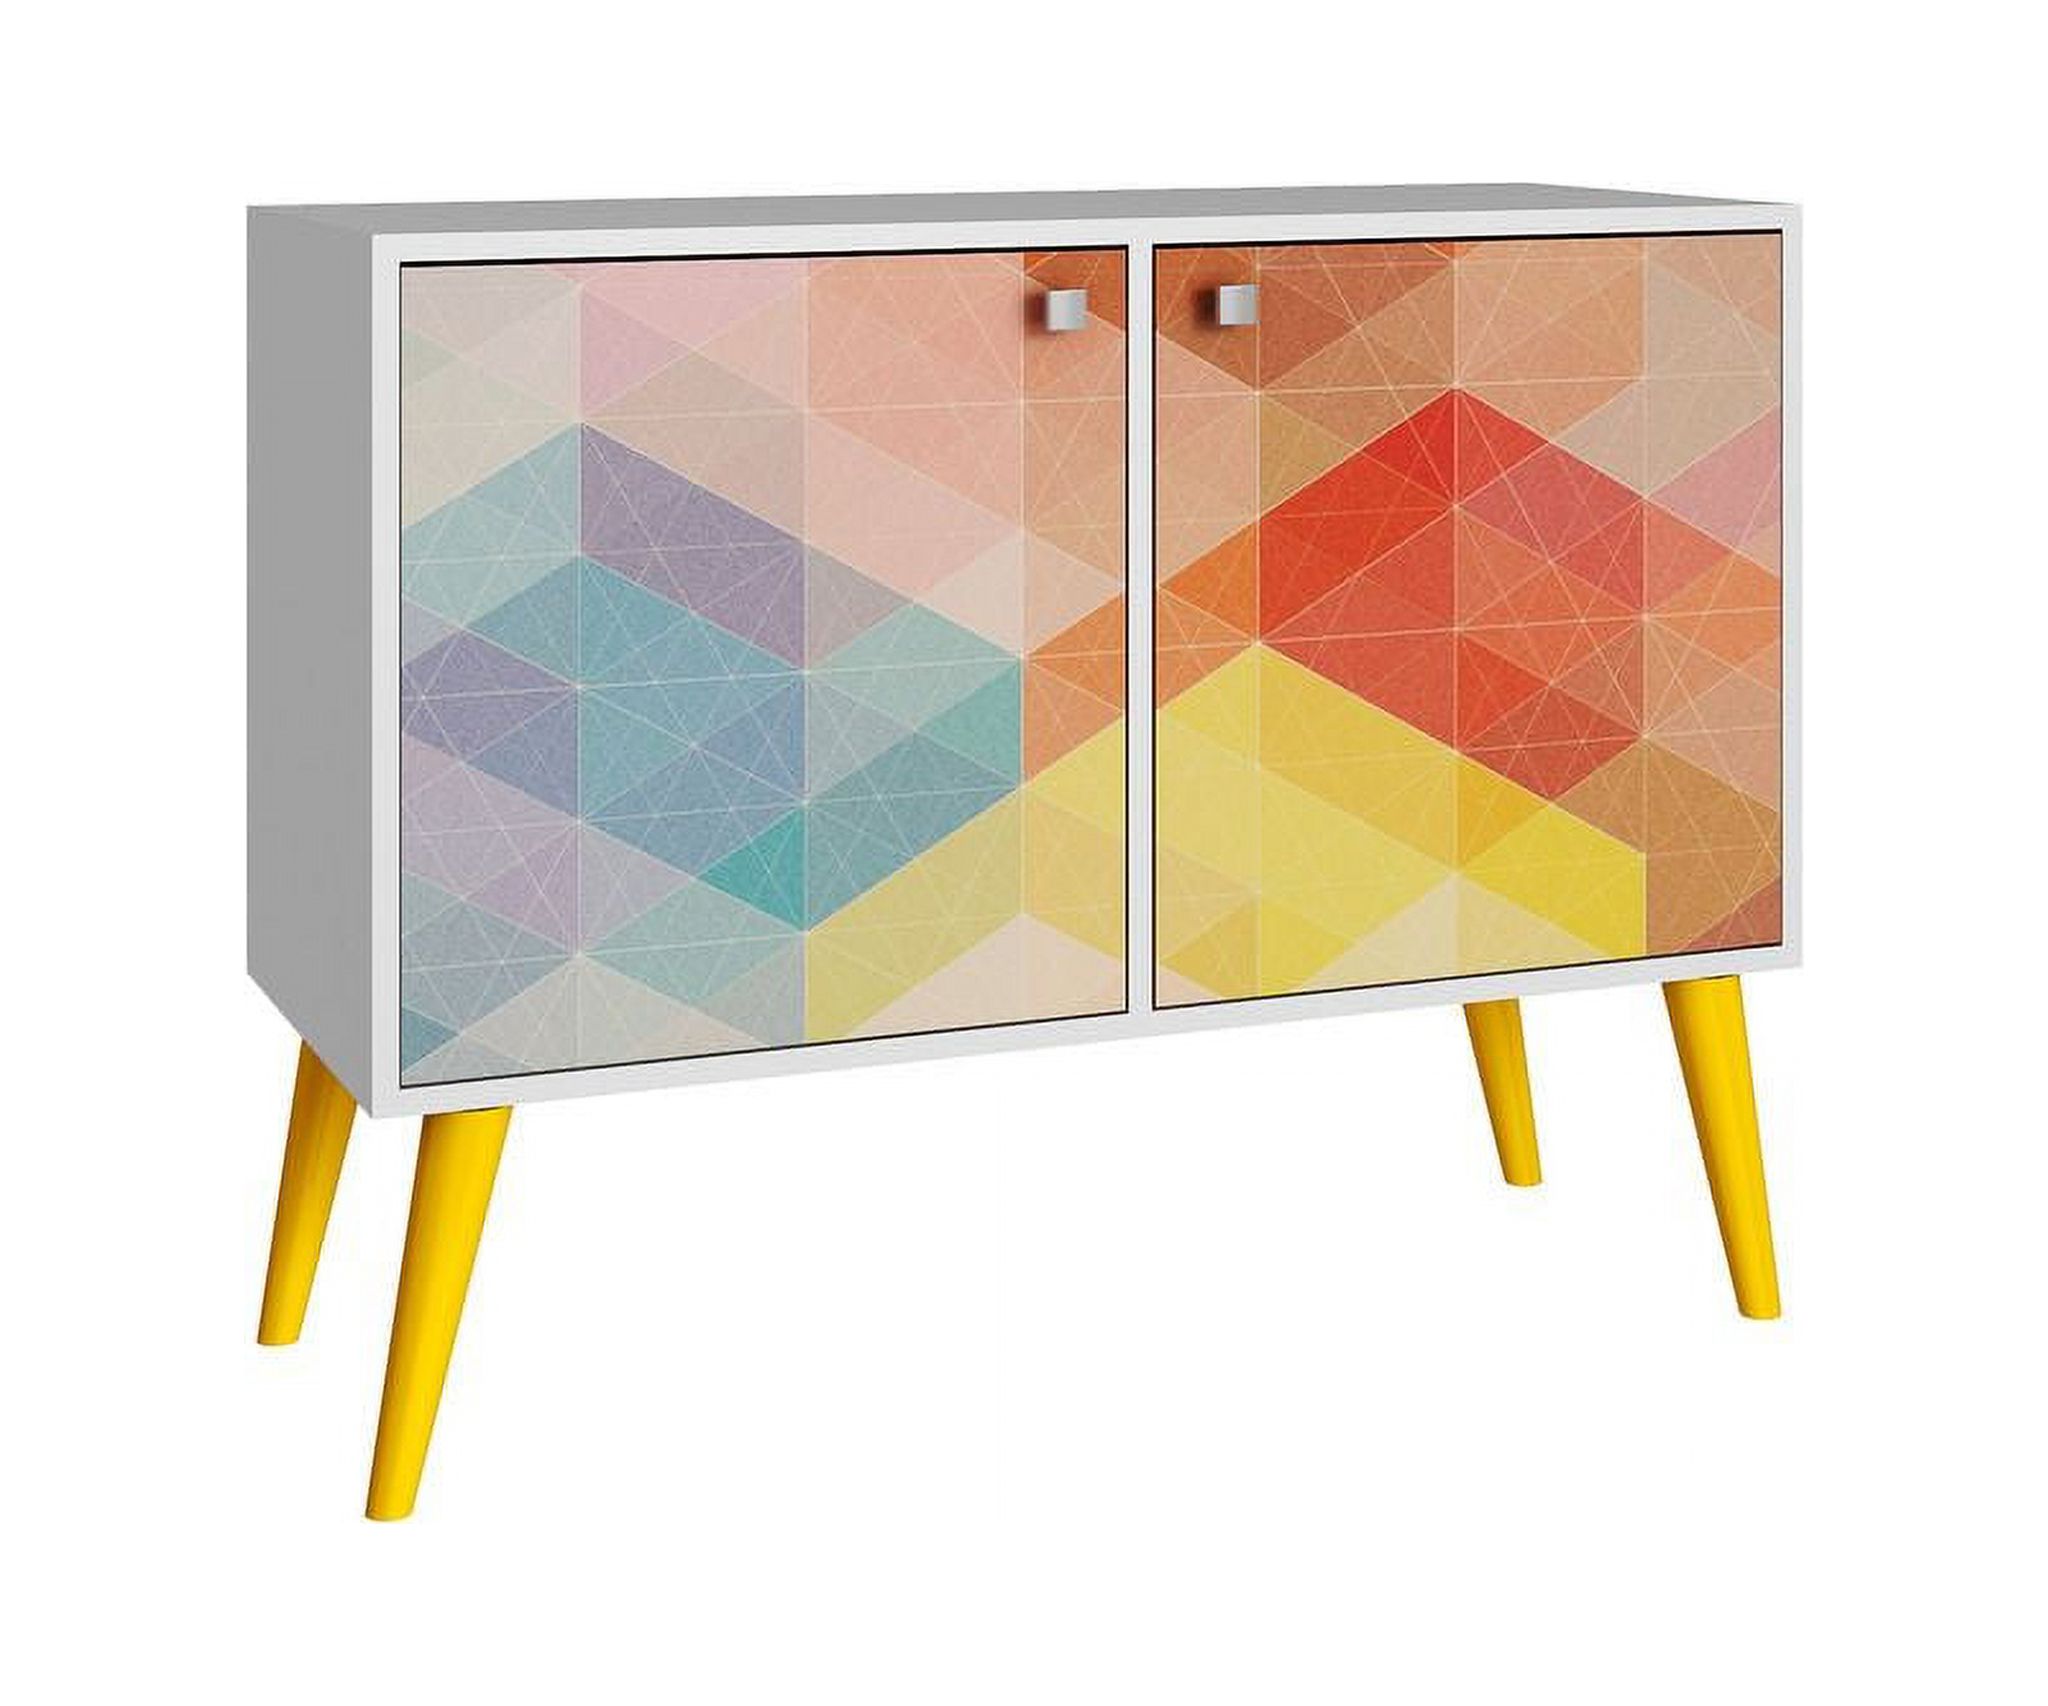 Avesta Double Side Table. 2.0 with 3 shelves in White/ Stamp/ Yellow - image 1 of 2